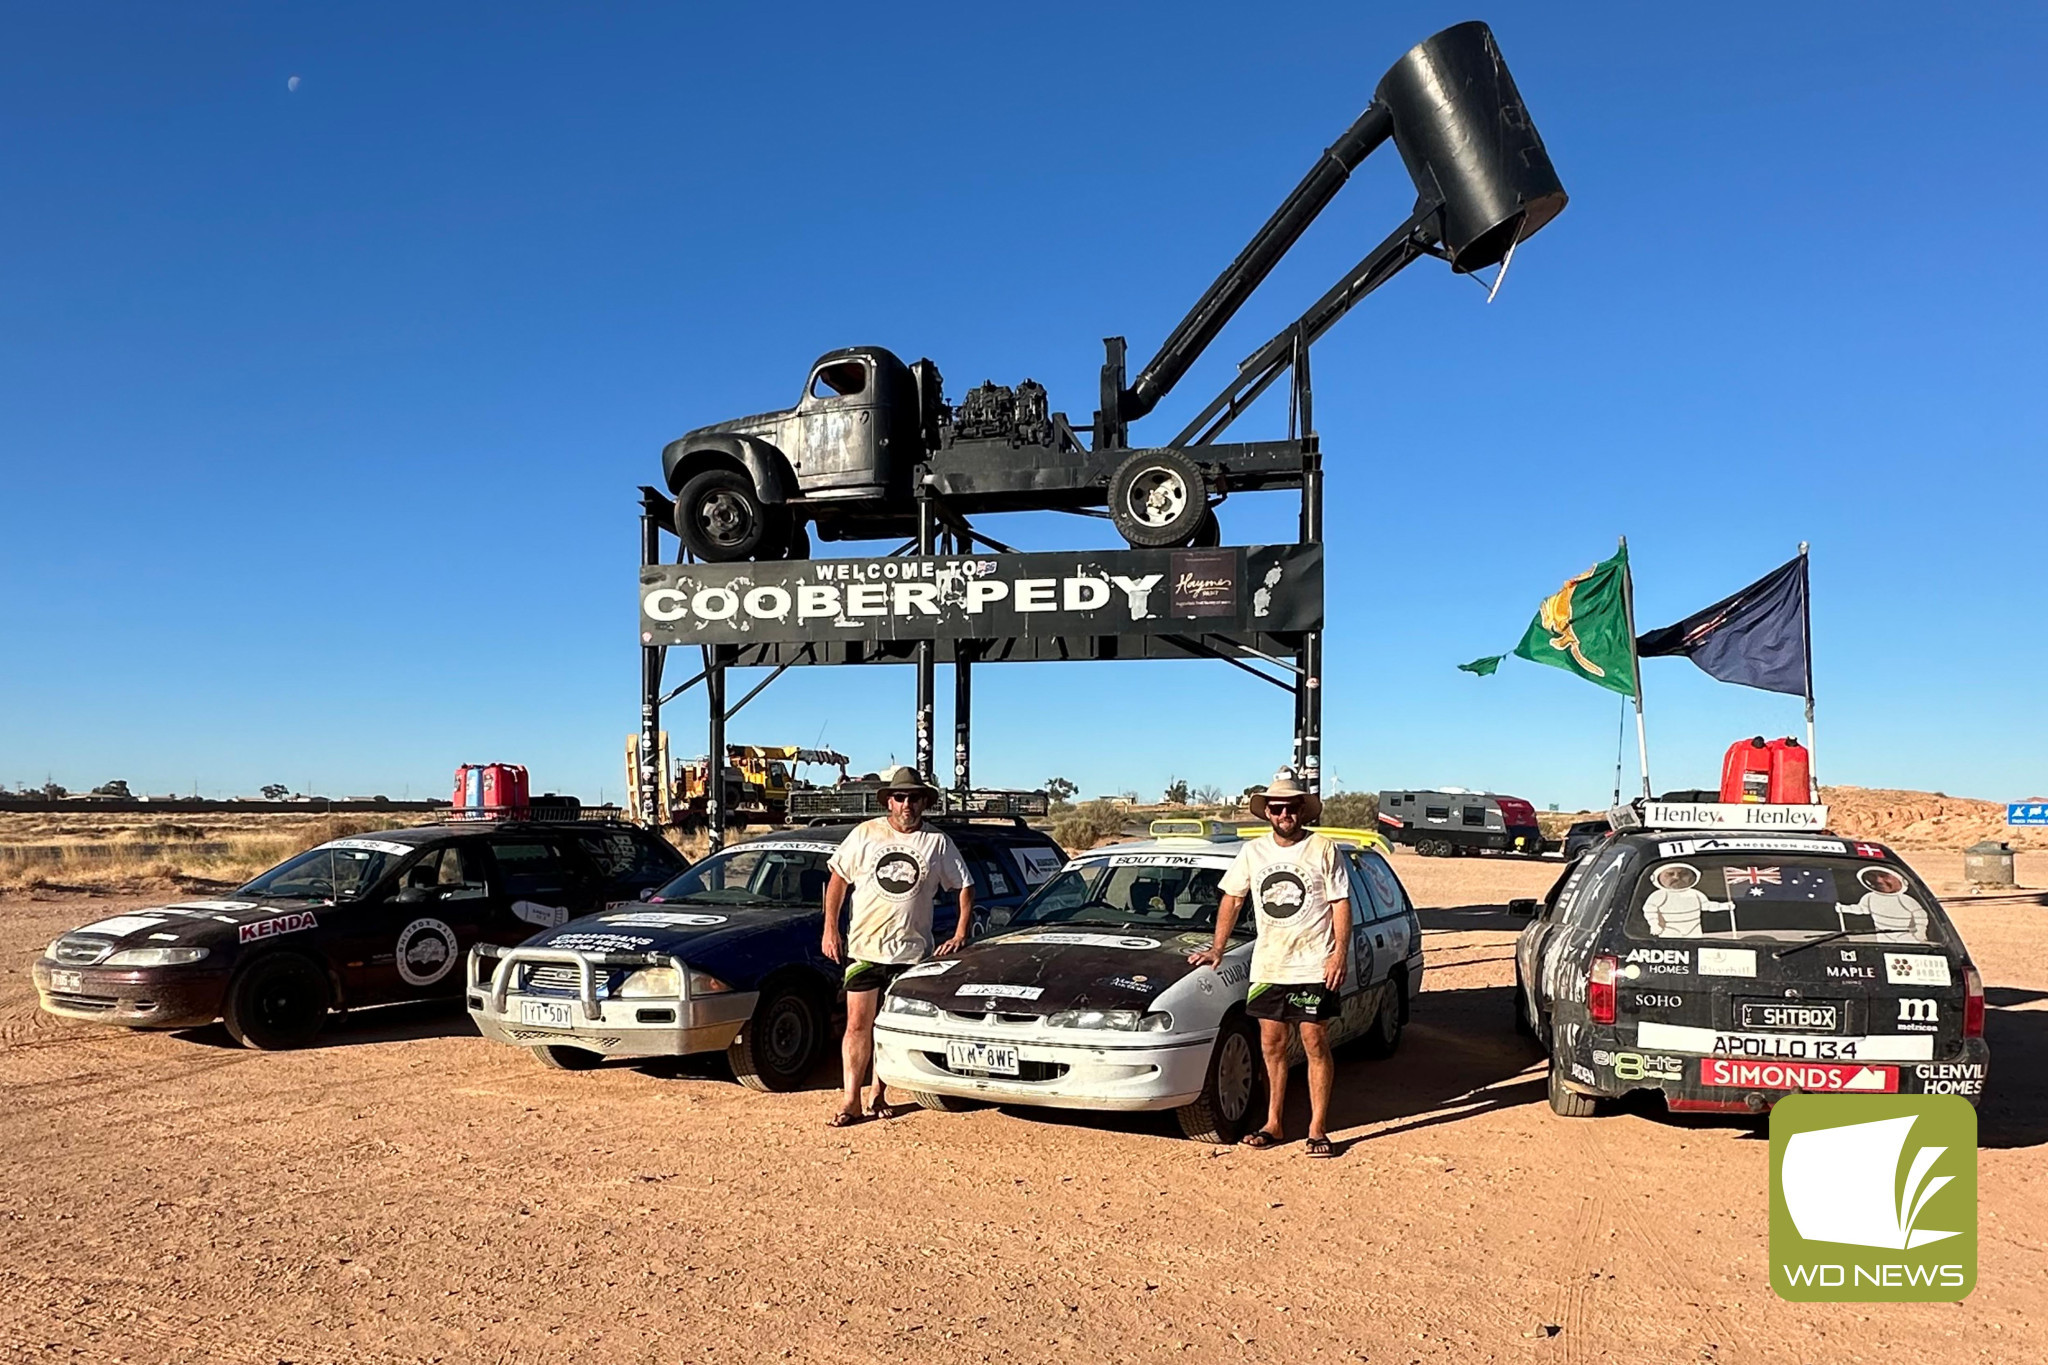 Off the beaten track: Dwayne Dolling and Jason McGlynn are currently traversing the rugged Australian outback in a dodgy old Holden Commodore, having raised more than $11,000 for cancer research as part of their journey.